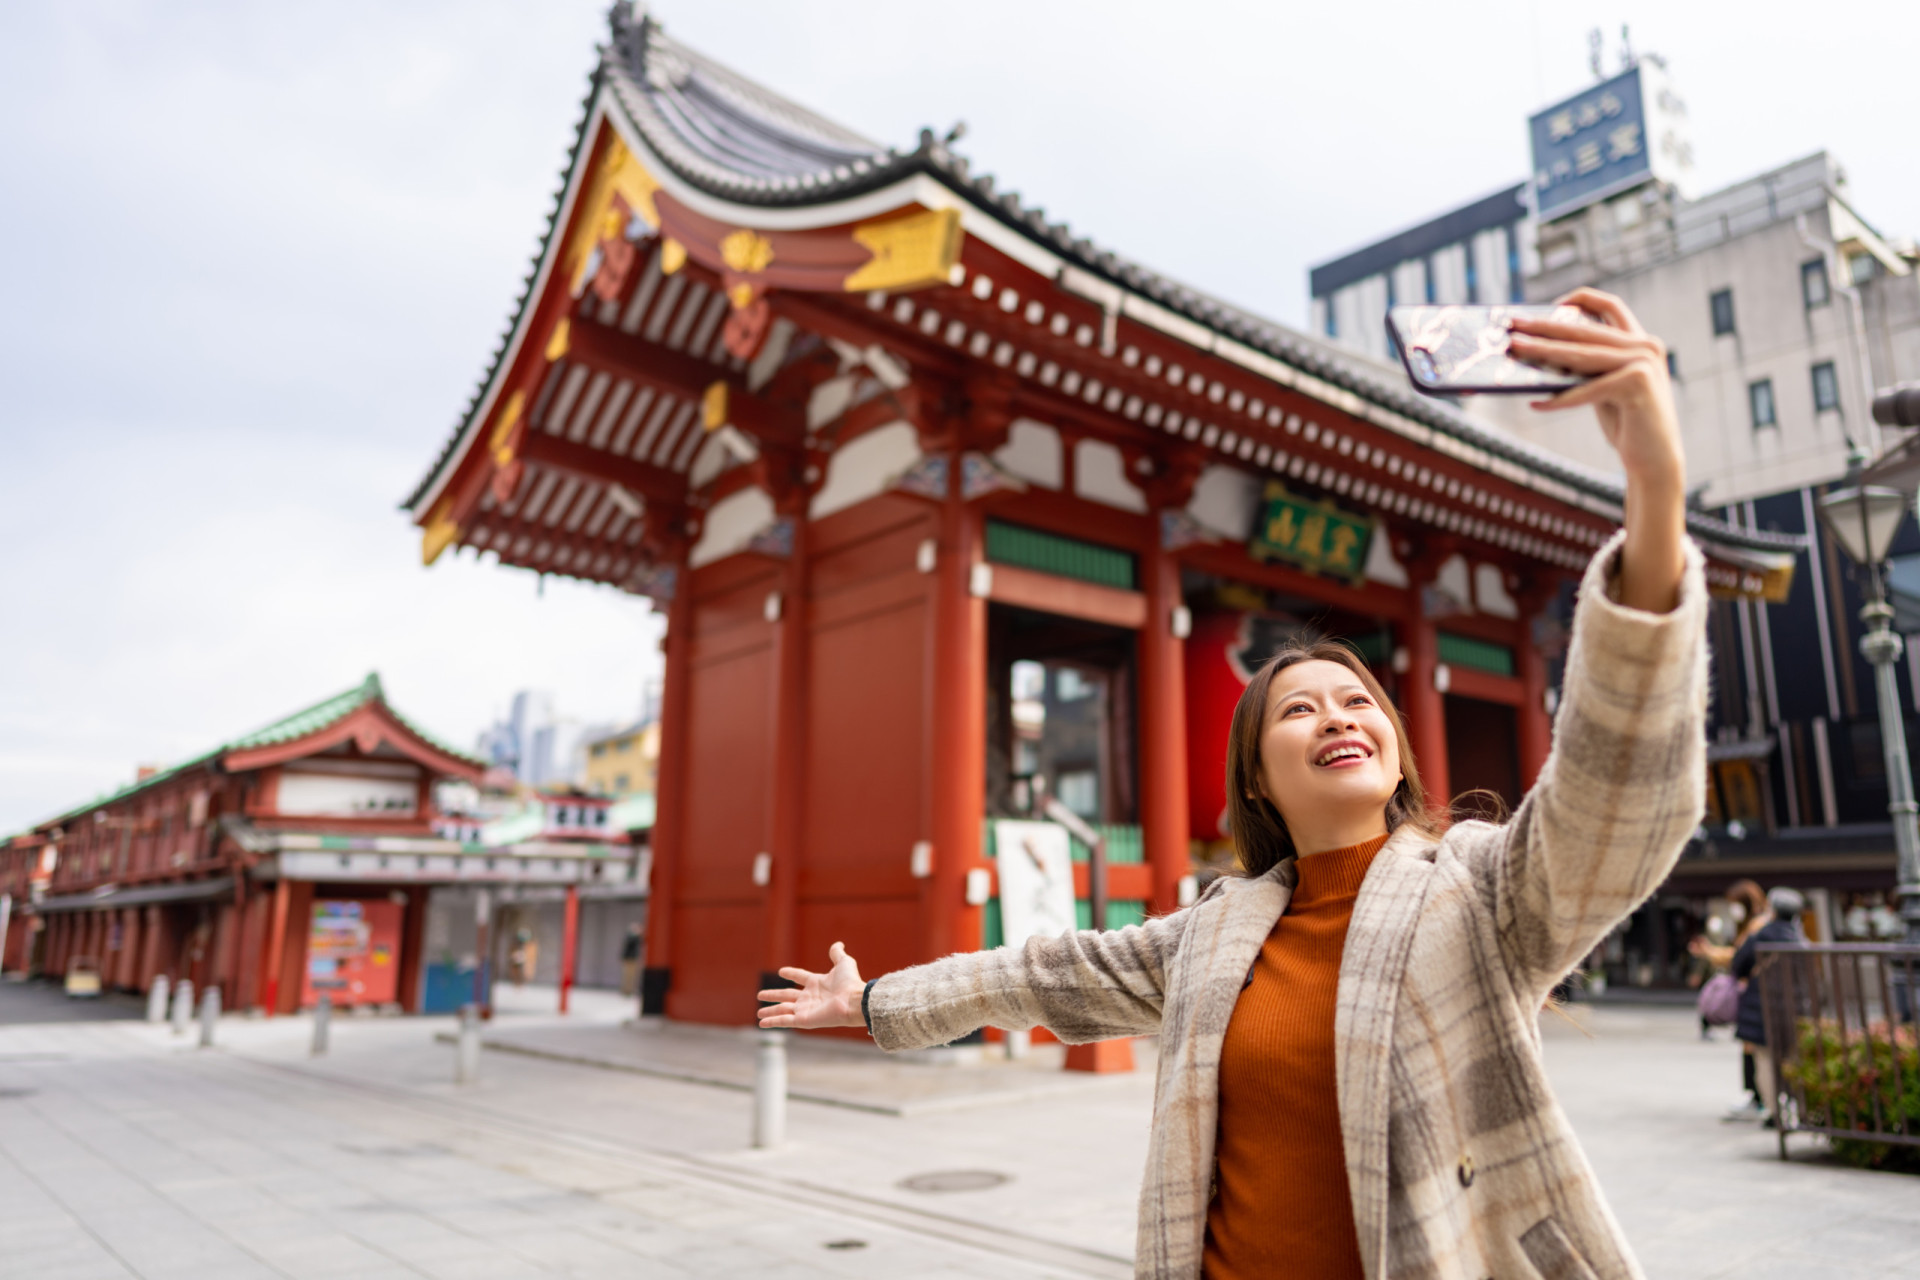 <p>Japan has a 1,000 yen (US$9.25) fee, paid by international visitors as they leave the country.</p><p>You may also like:<a href="https://www.starsinsider.com/n/347191?utm_source=msn.com&utm_medium=display&utm_campaign=referral_description&utm_content=683460en-ph"> Decoding the symbolism of Freemasonry</a></p>